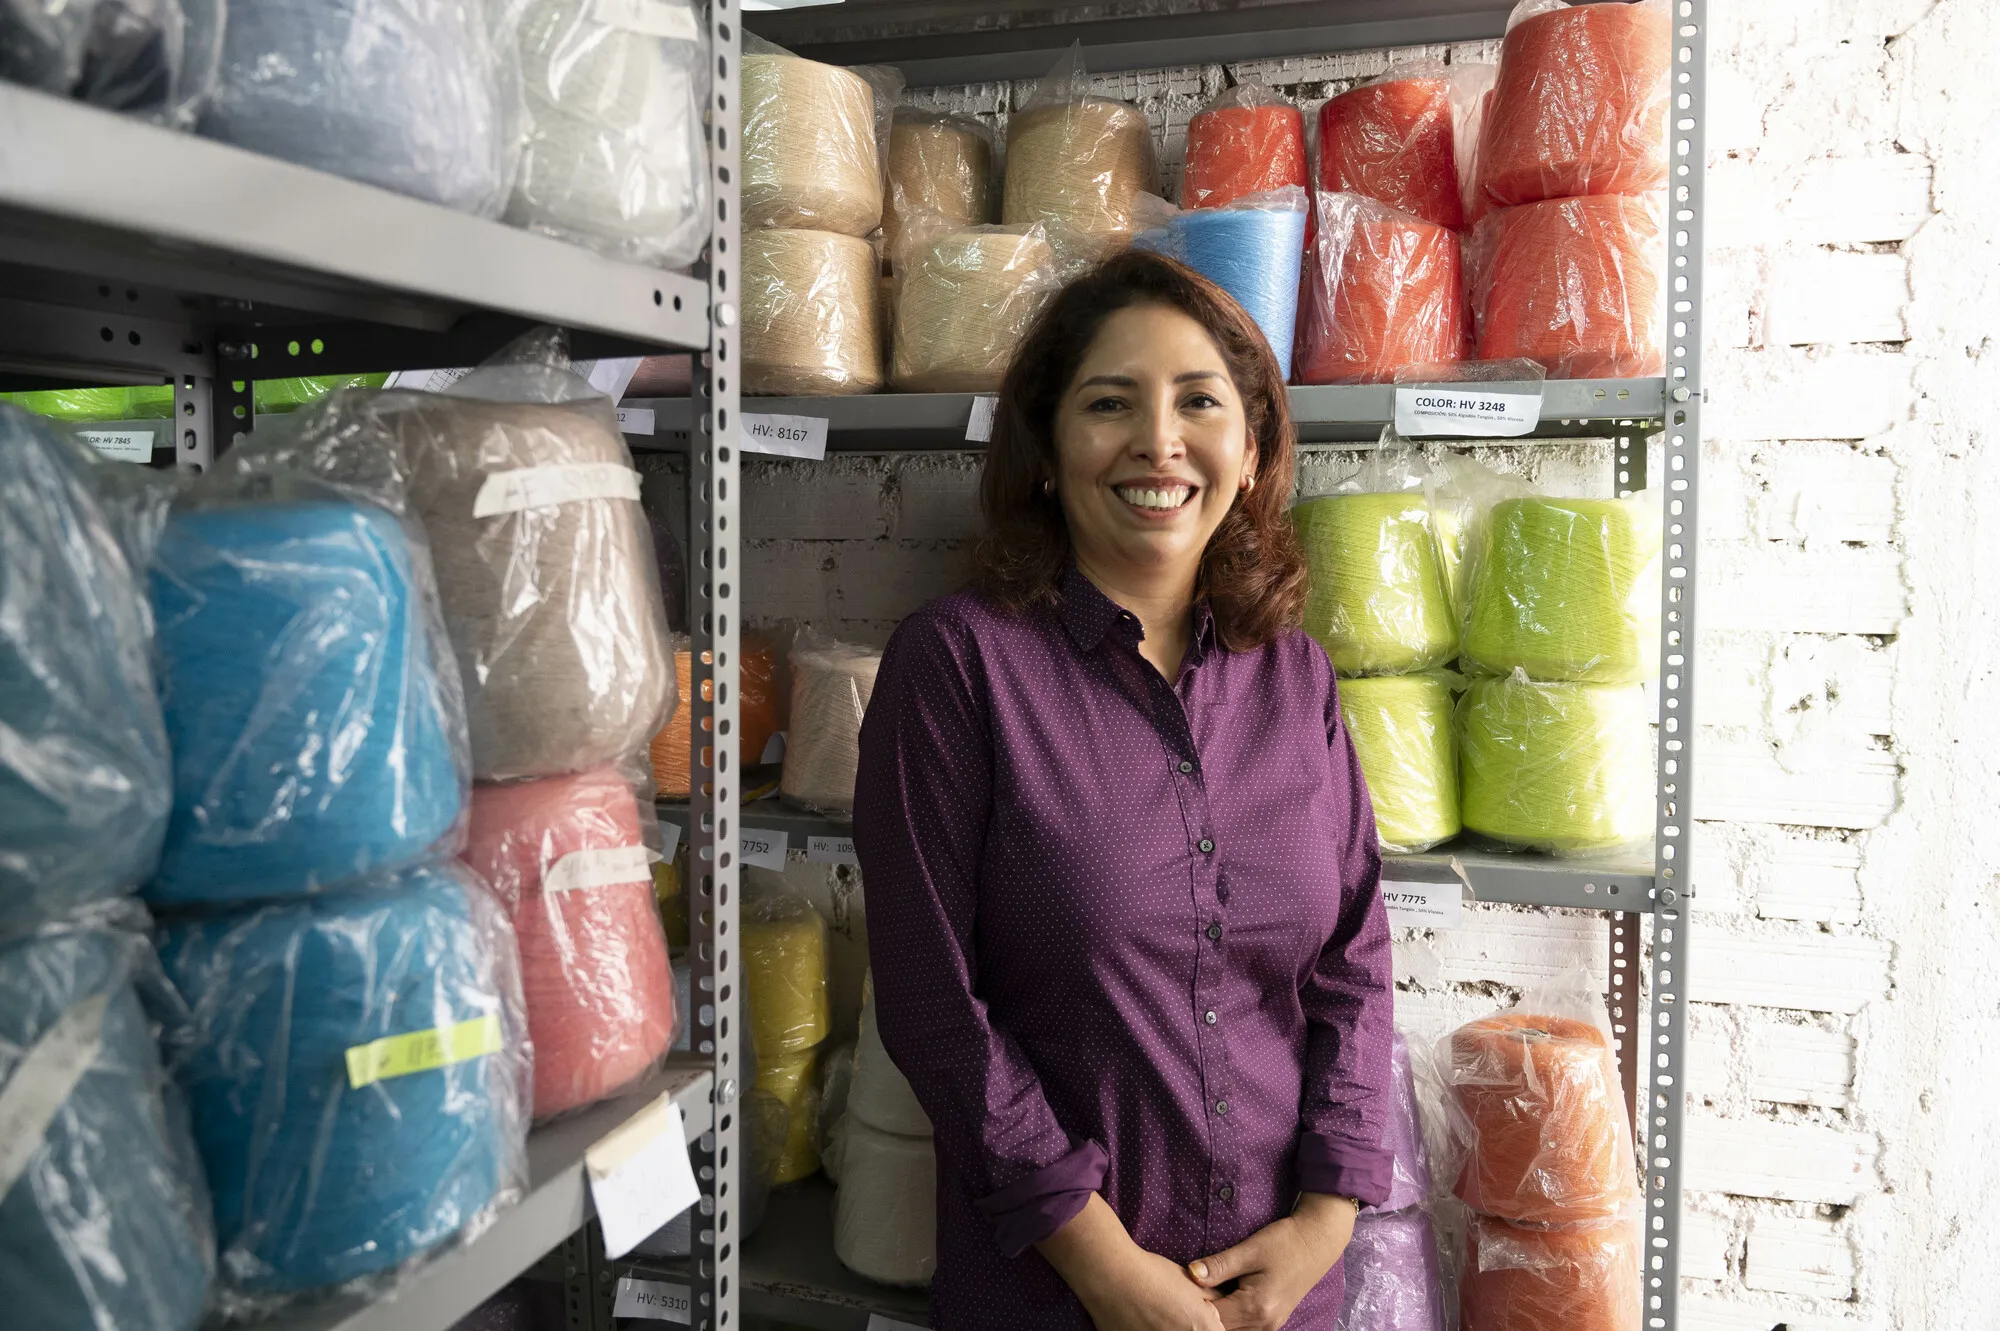 Portrait of a smiling woman wearing a purple shirt, surrounded by spools of yarn and thread